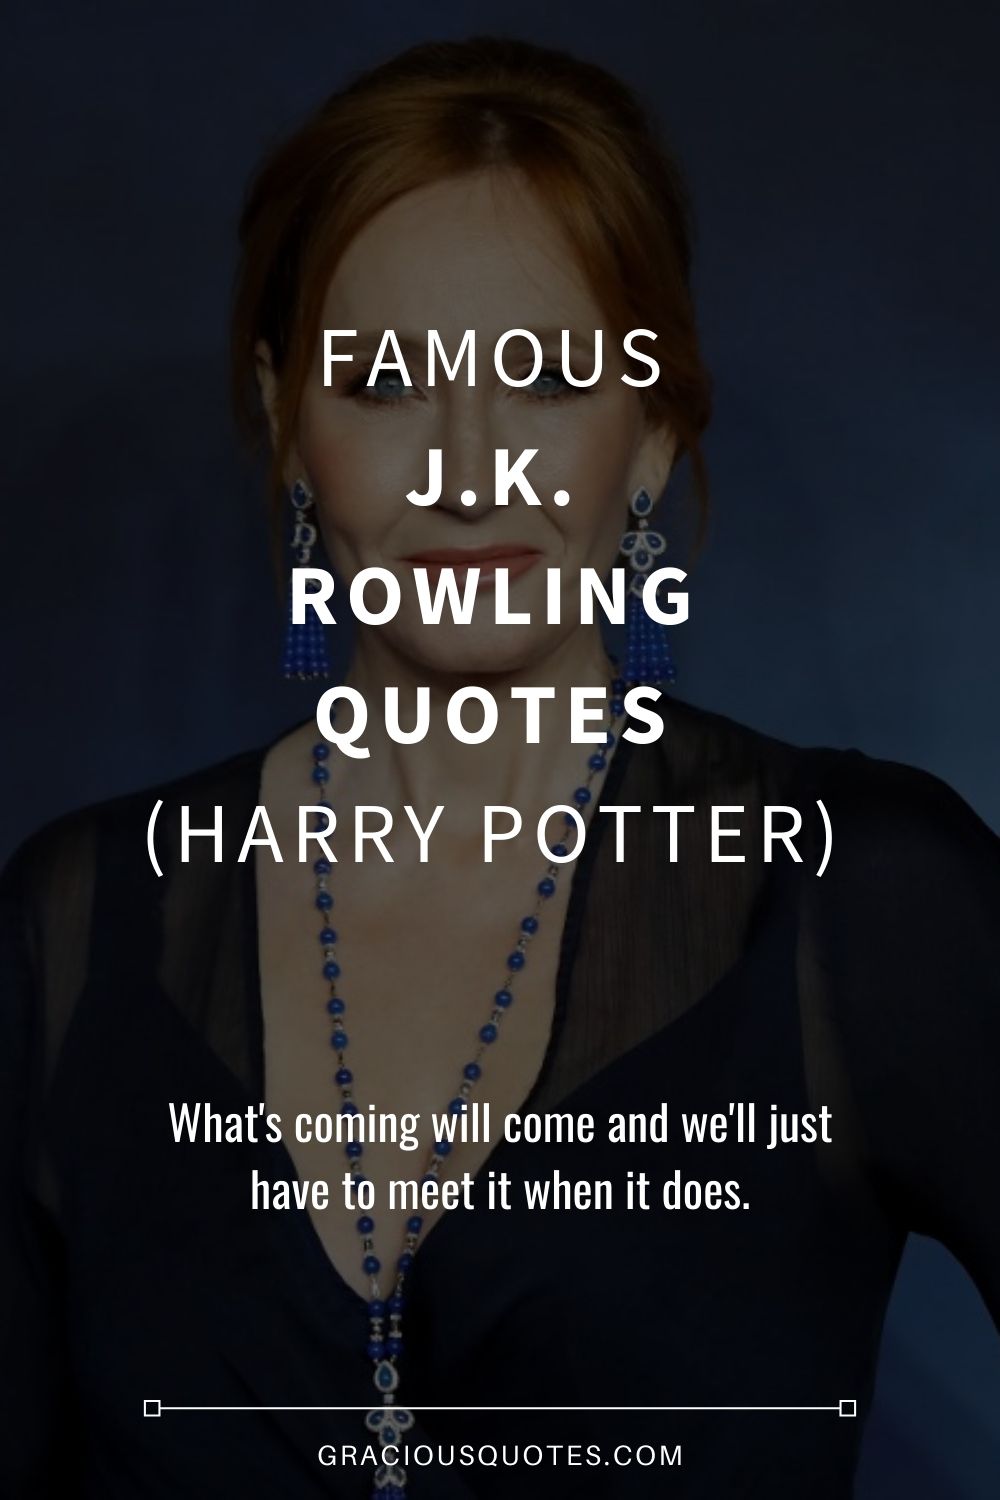 J.K. Rowling Quote: “If you want to know what a man's like, take a good look